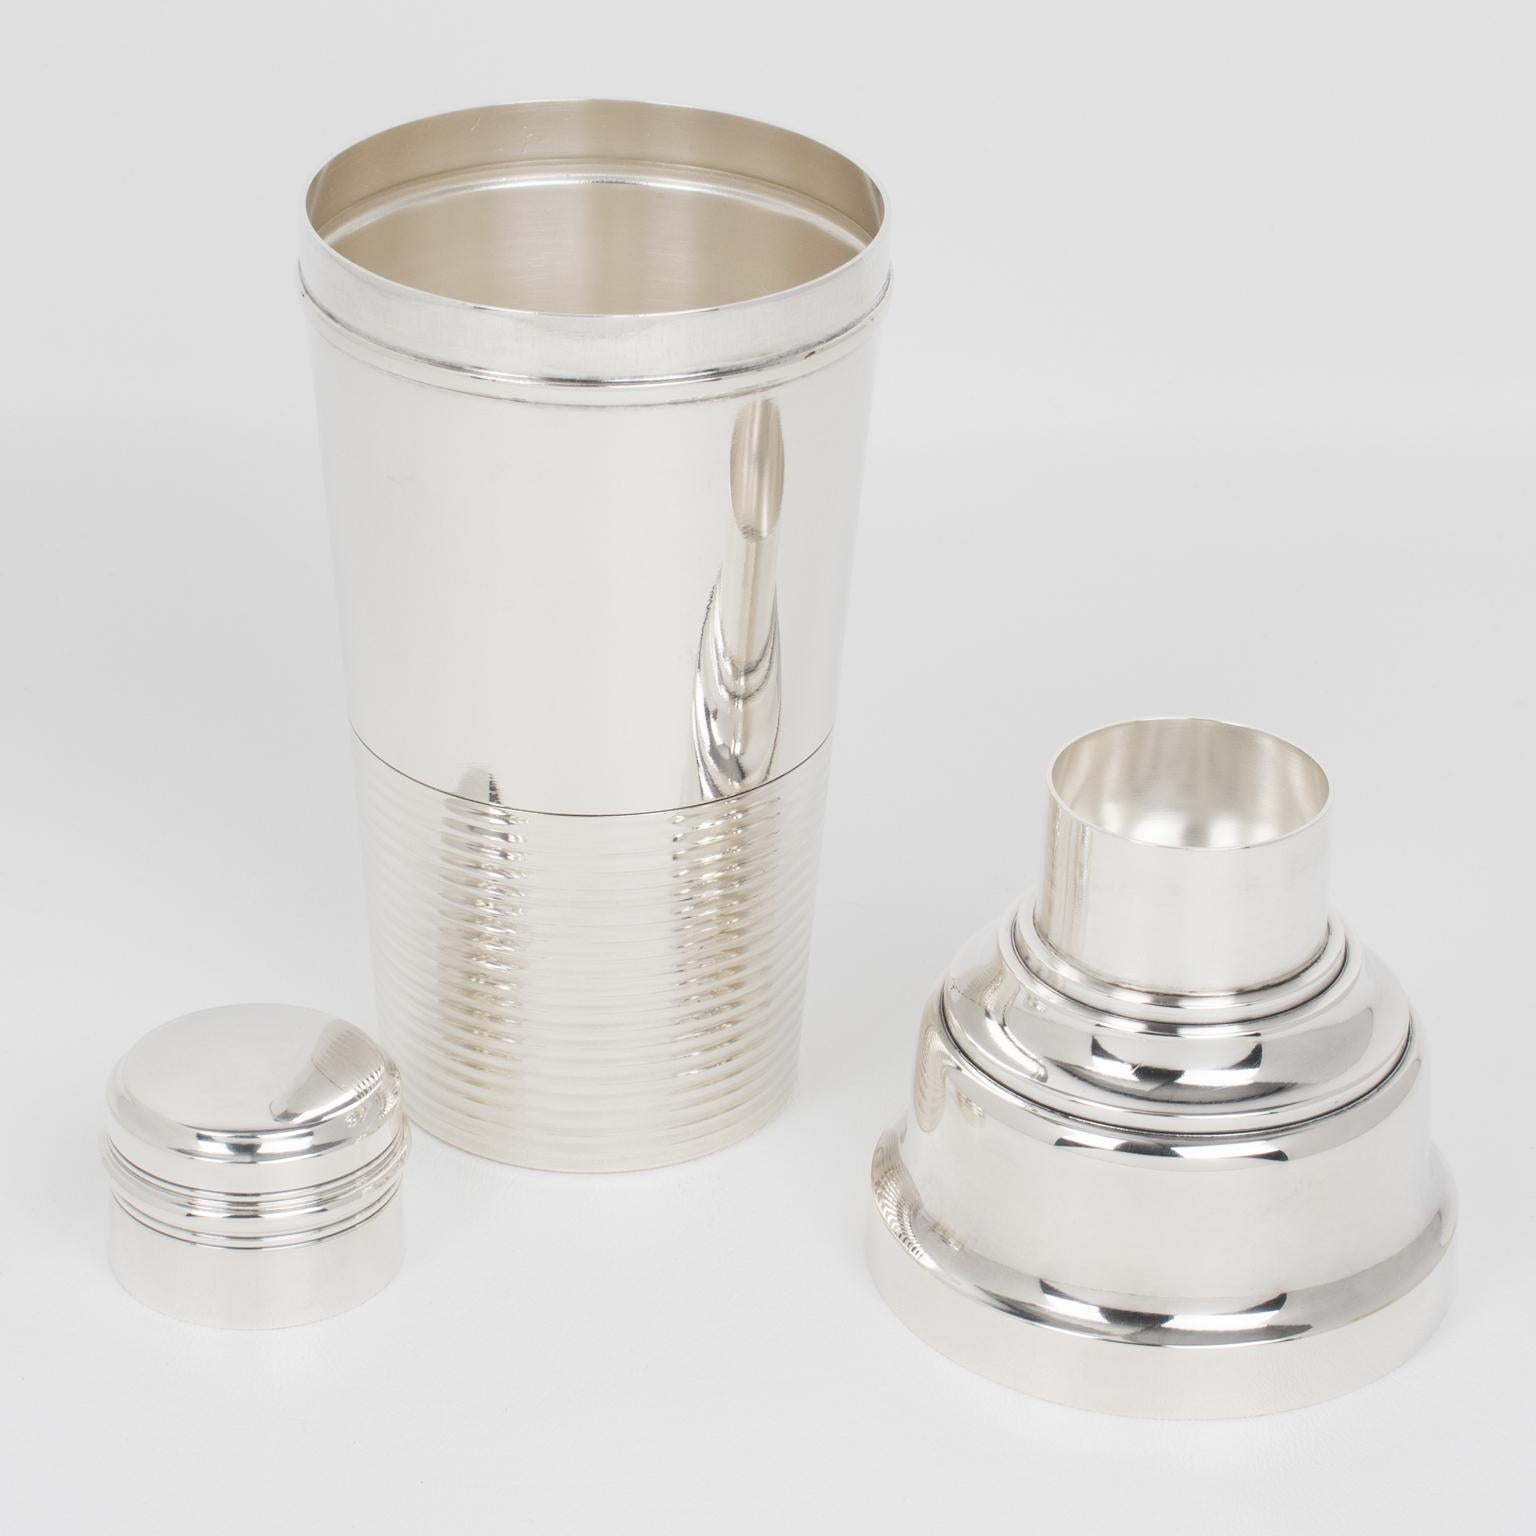 French silversmith Societe Parisienne d'Orfevrerie (SPO), Paris, crafted this lovely Art Deco silver plate cylindrical cocktail or Martini Shaker in the 1940s. The three-sectioned cocktail shaker has a removable cap and strainer. This accessory for